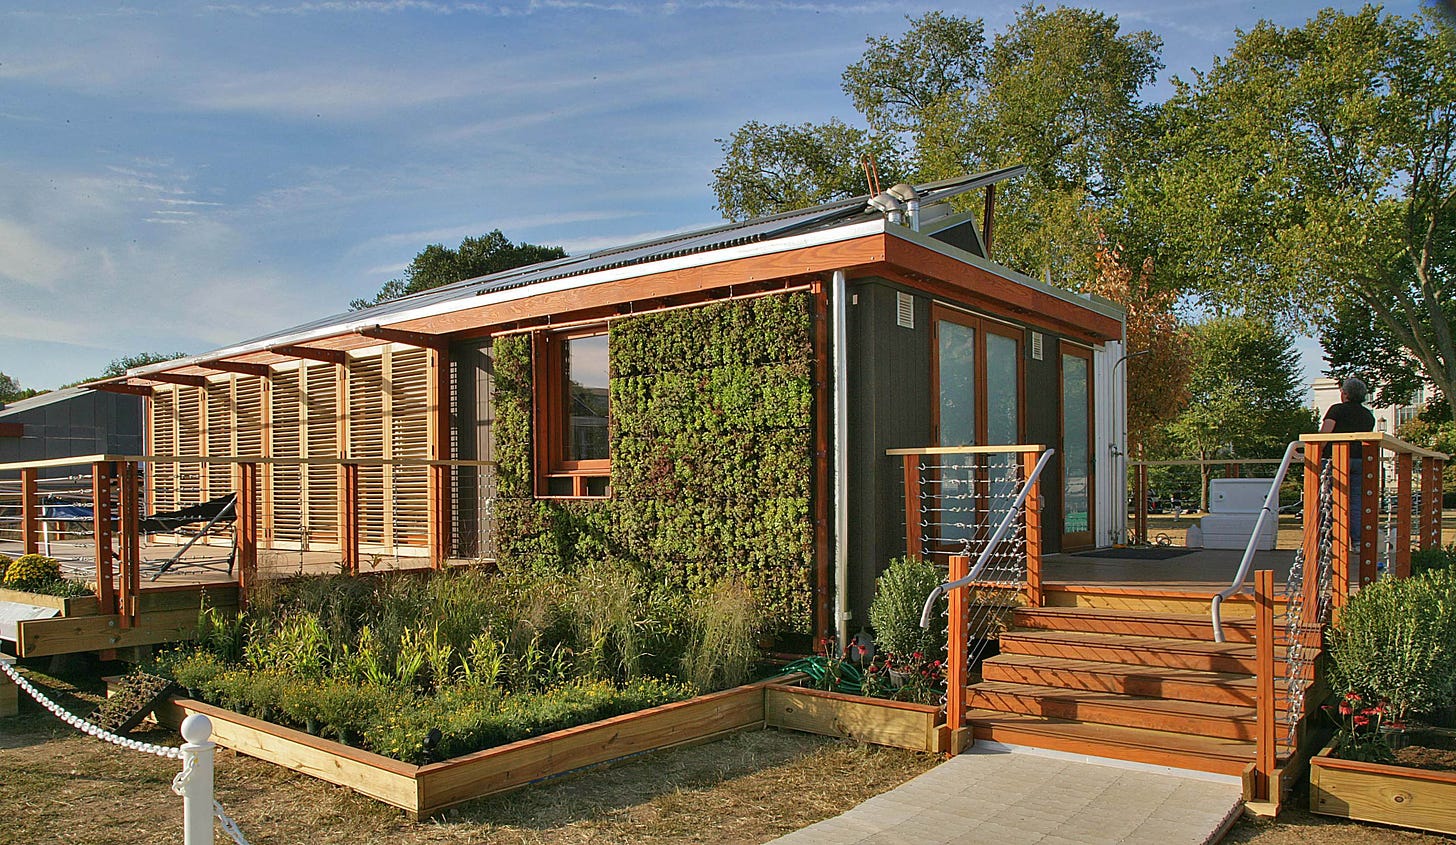 Photograph of a solar “tiny house,” LEAFHouse, the University of Maryland’s entry in the DOE’s 2007 Solar Decathlon competition. The view is from the corner of the house and you can see an outer wall covered with foliage, a section of wall with slatted shades, an open deck space and a small wild-looking garden plot out front.